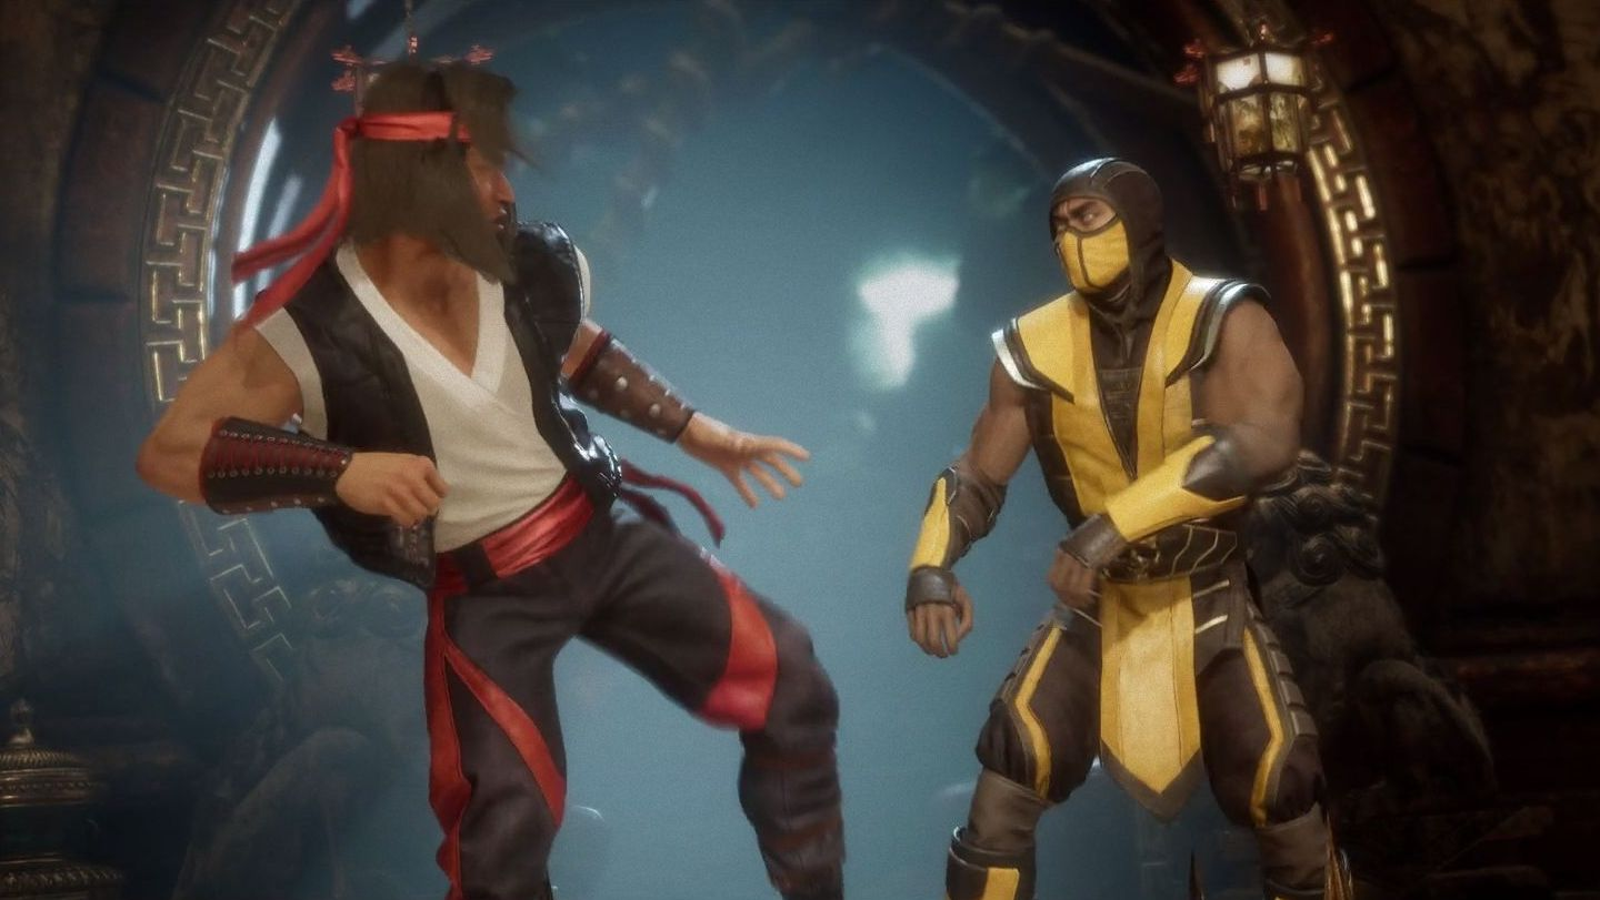 Game Informer on X: Mortal Kombat 11 has co-op boss battles, and its Tower  of Time mode will have some single-player tag-team towers.    / X